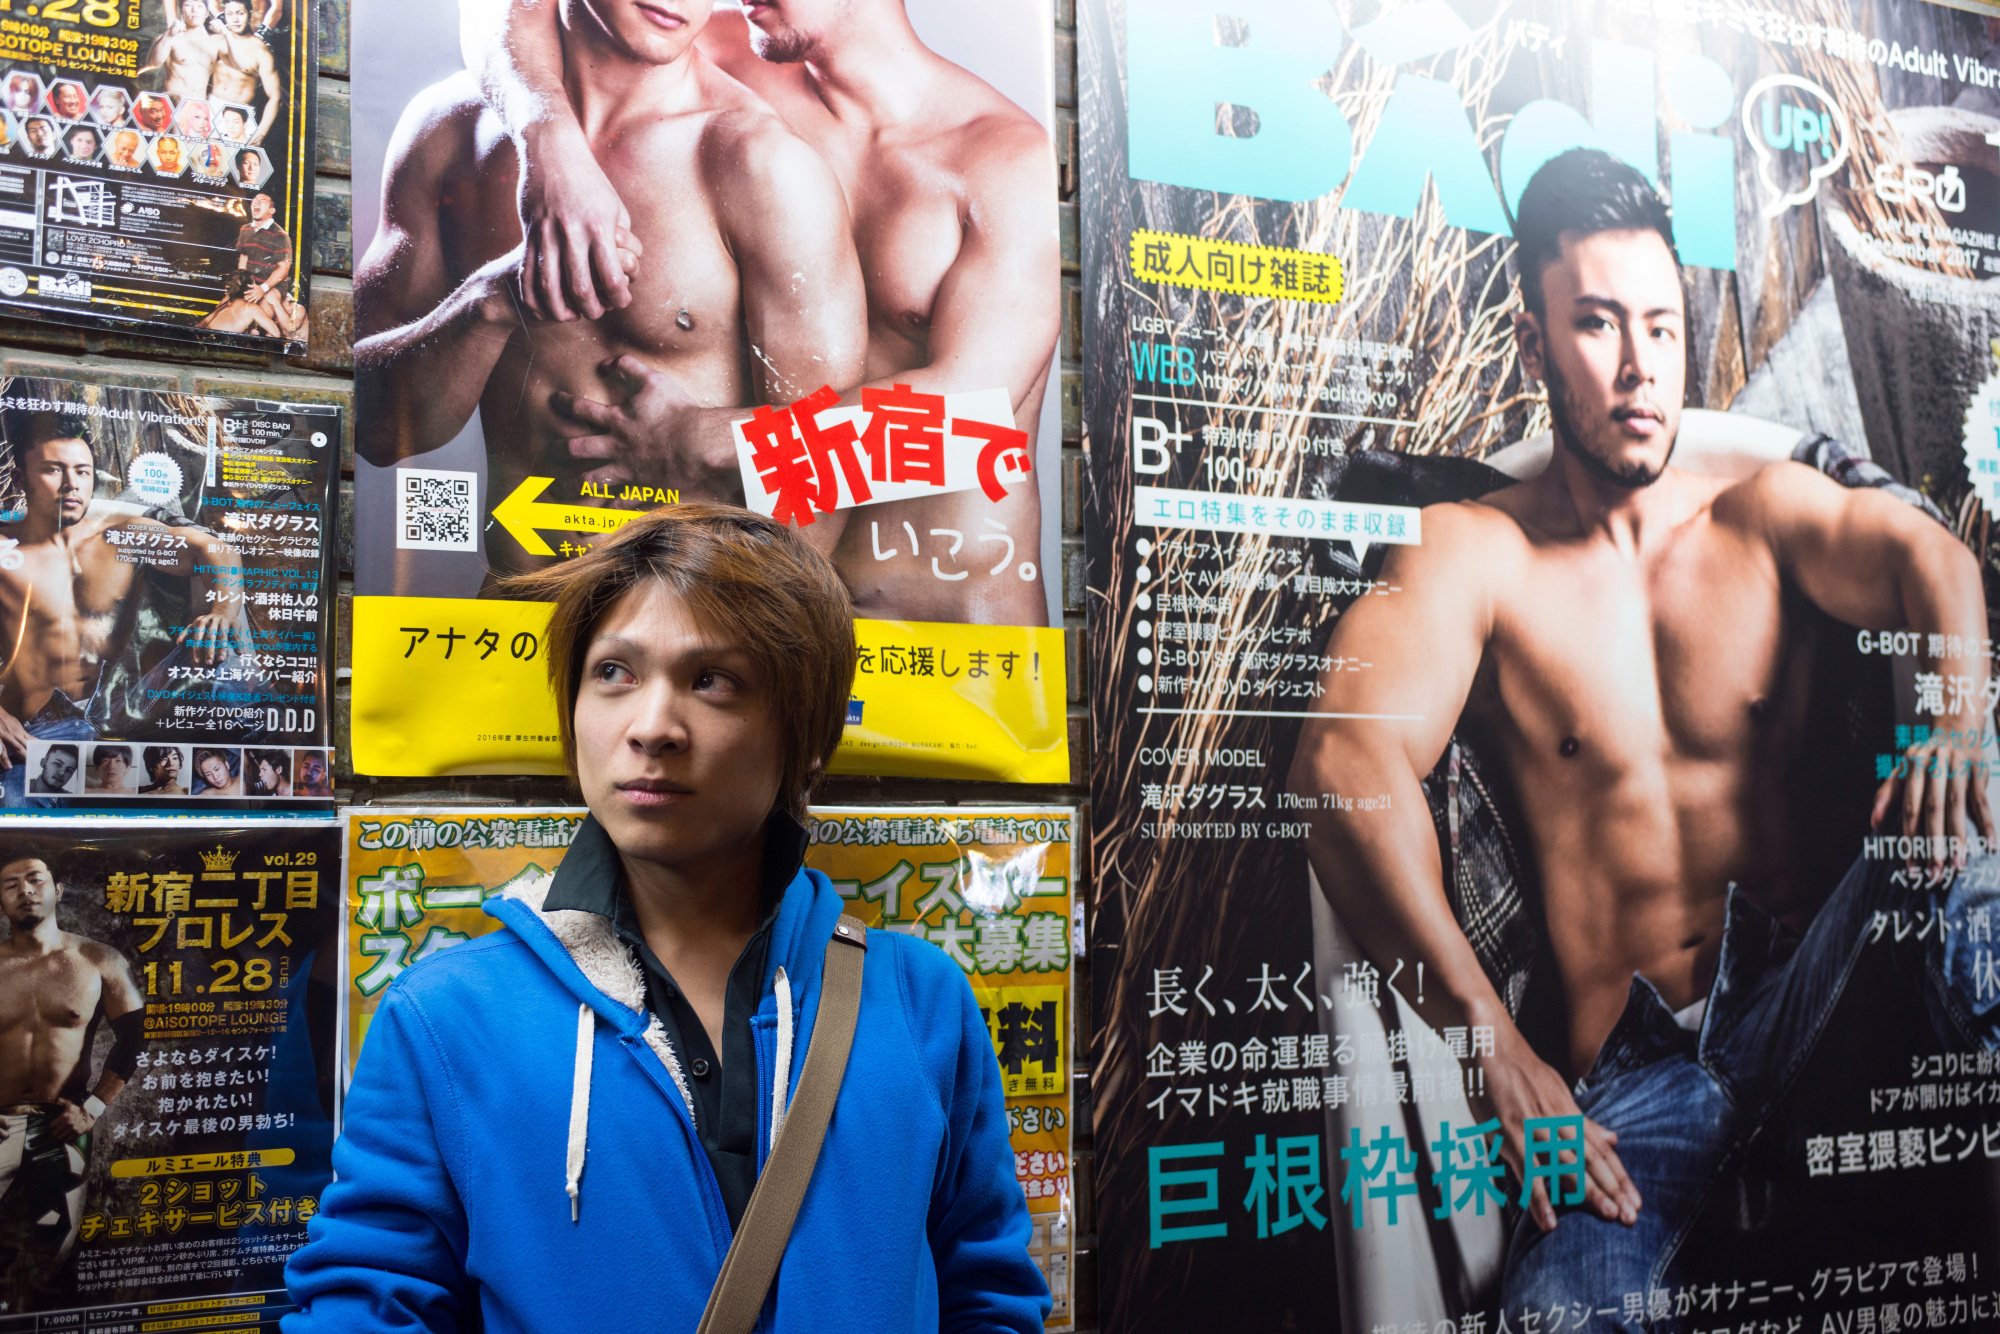 Boys for rent in Tokyo Sex, lies and vulnerable young lives picture image